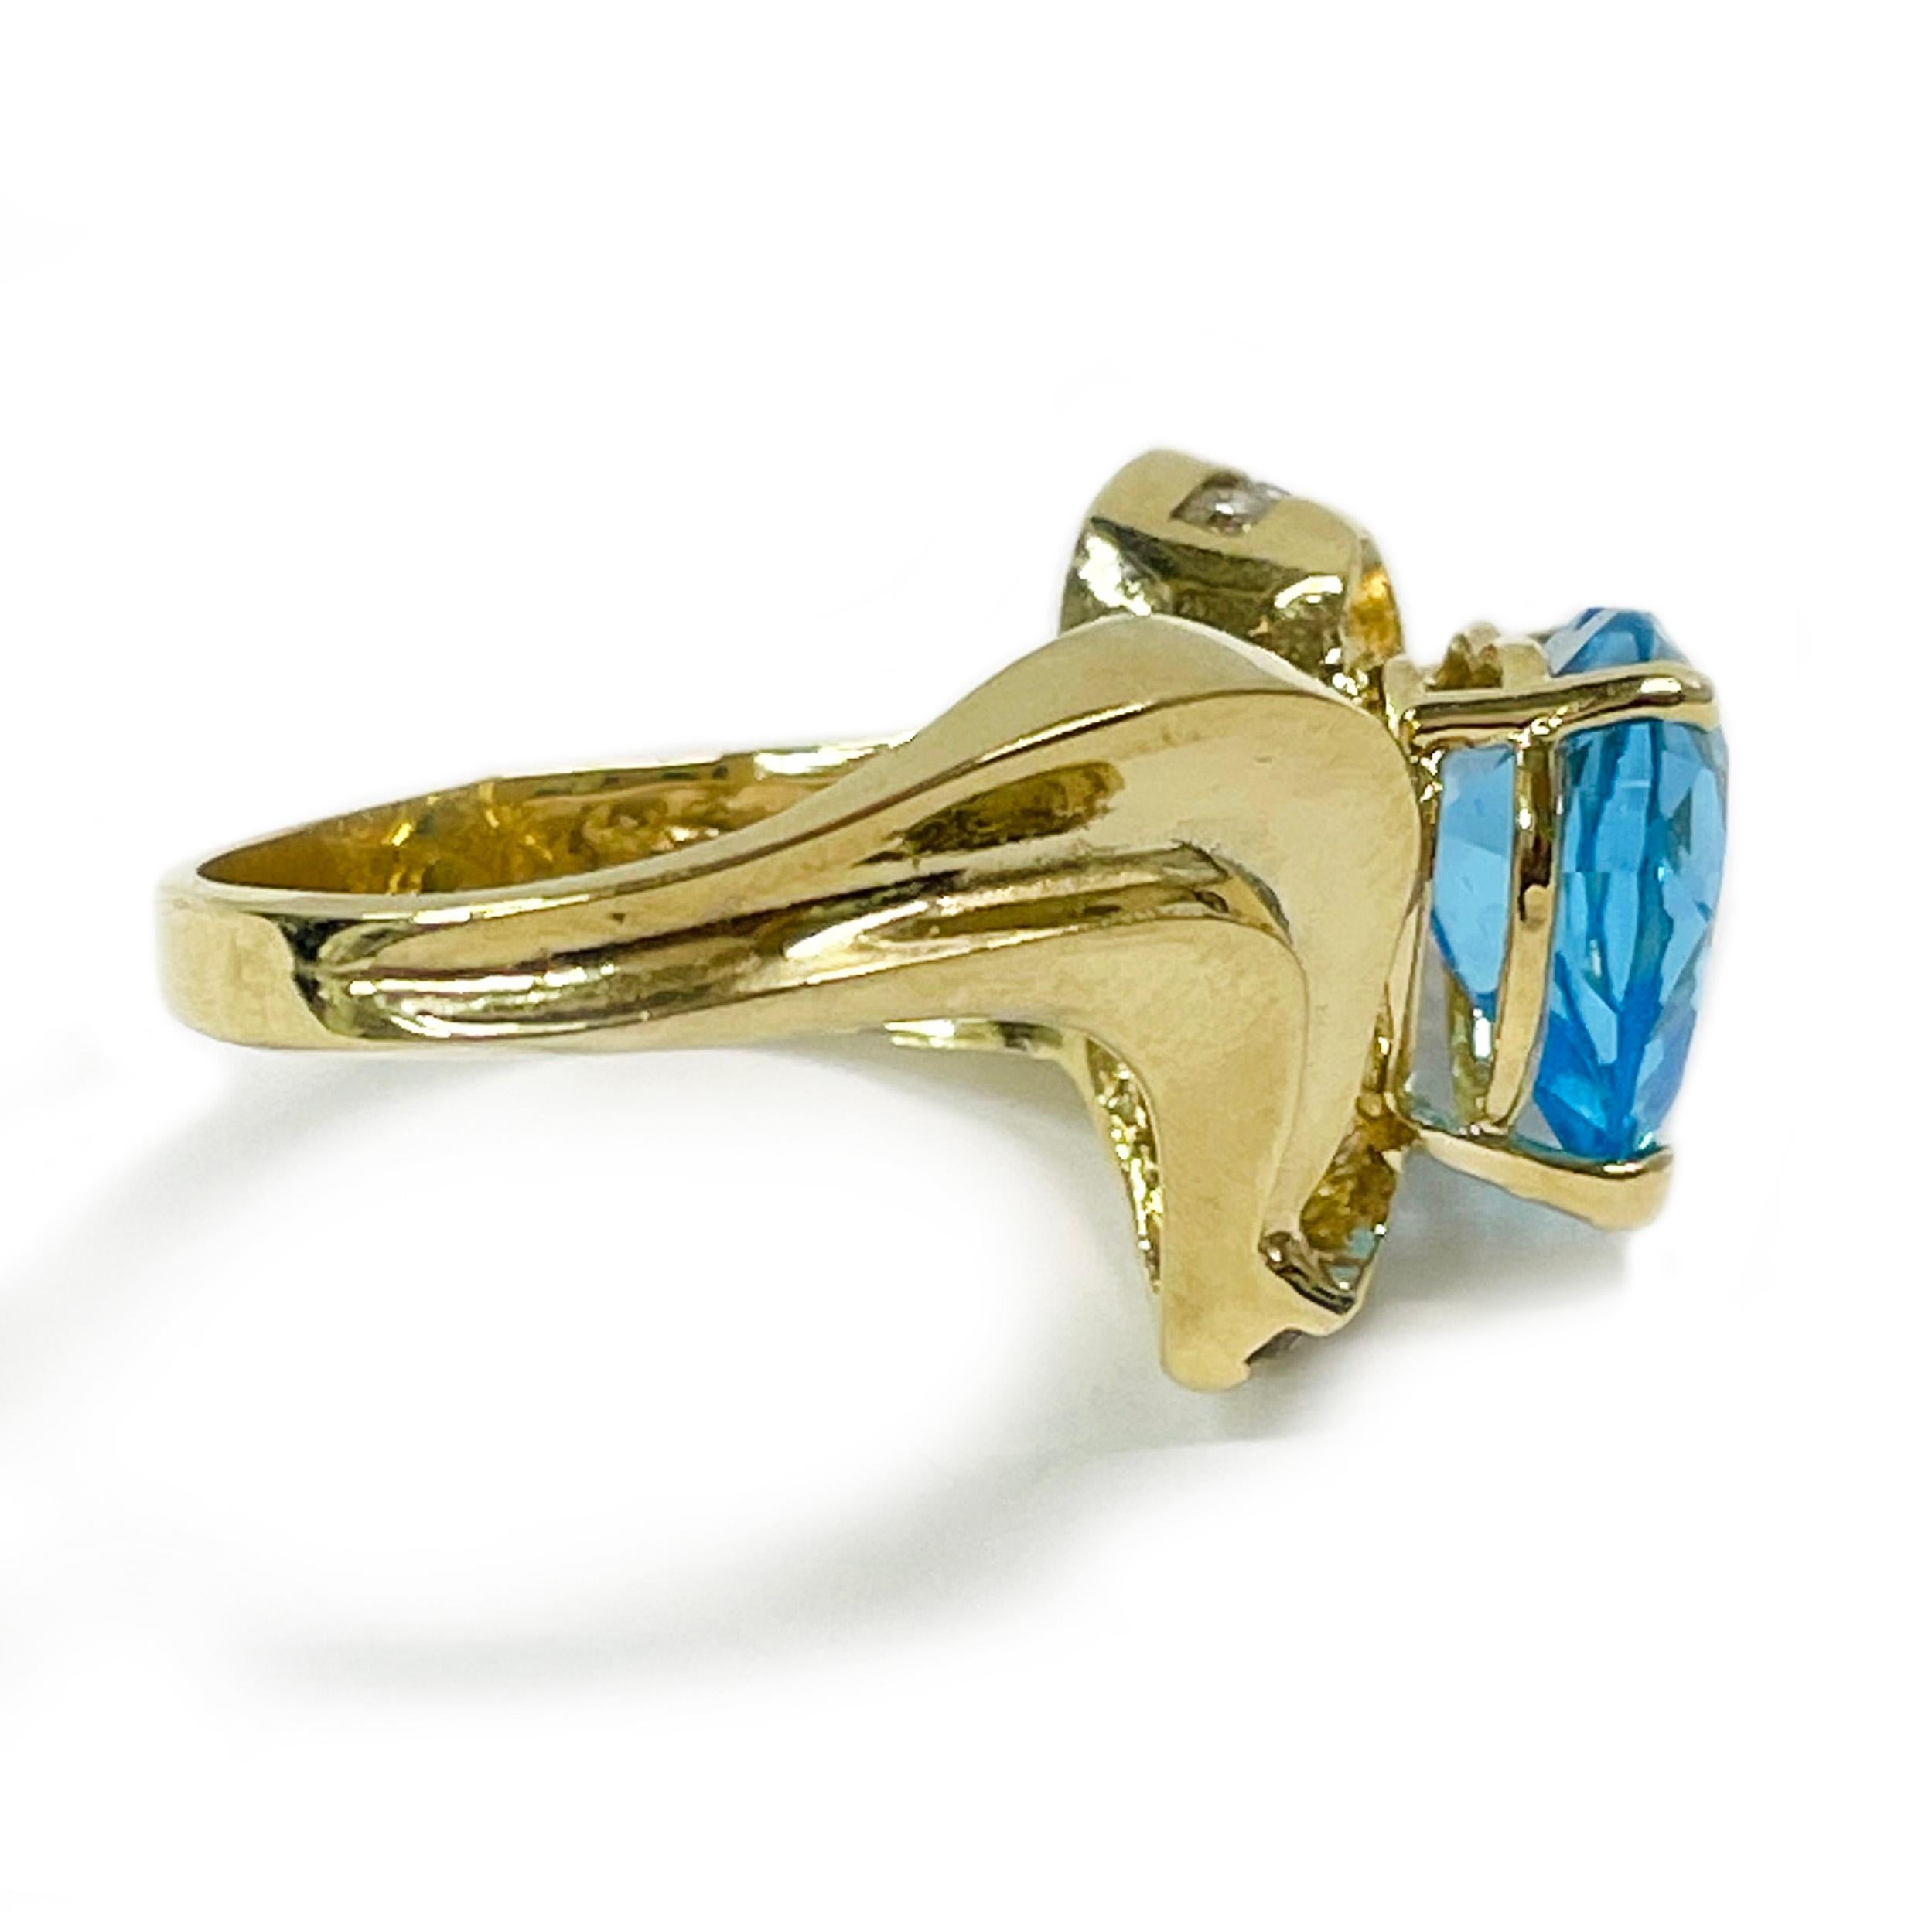 14 Karat Yellow Gold Swiss Blue Topaz Heart Diamond Ring. The ring features a 10 x 9.5mm heart-shaped Swiss Blue Topaz three-prong set on a raised gallery. Eleven round diamonds are channel-set on one side on a curved gold shape. The diamonds are